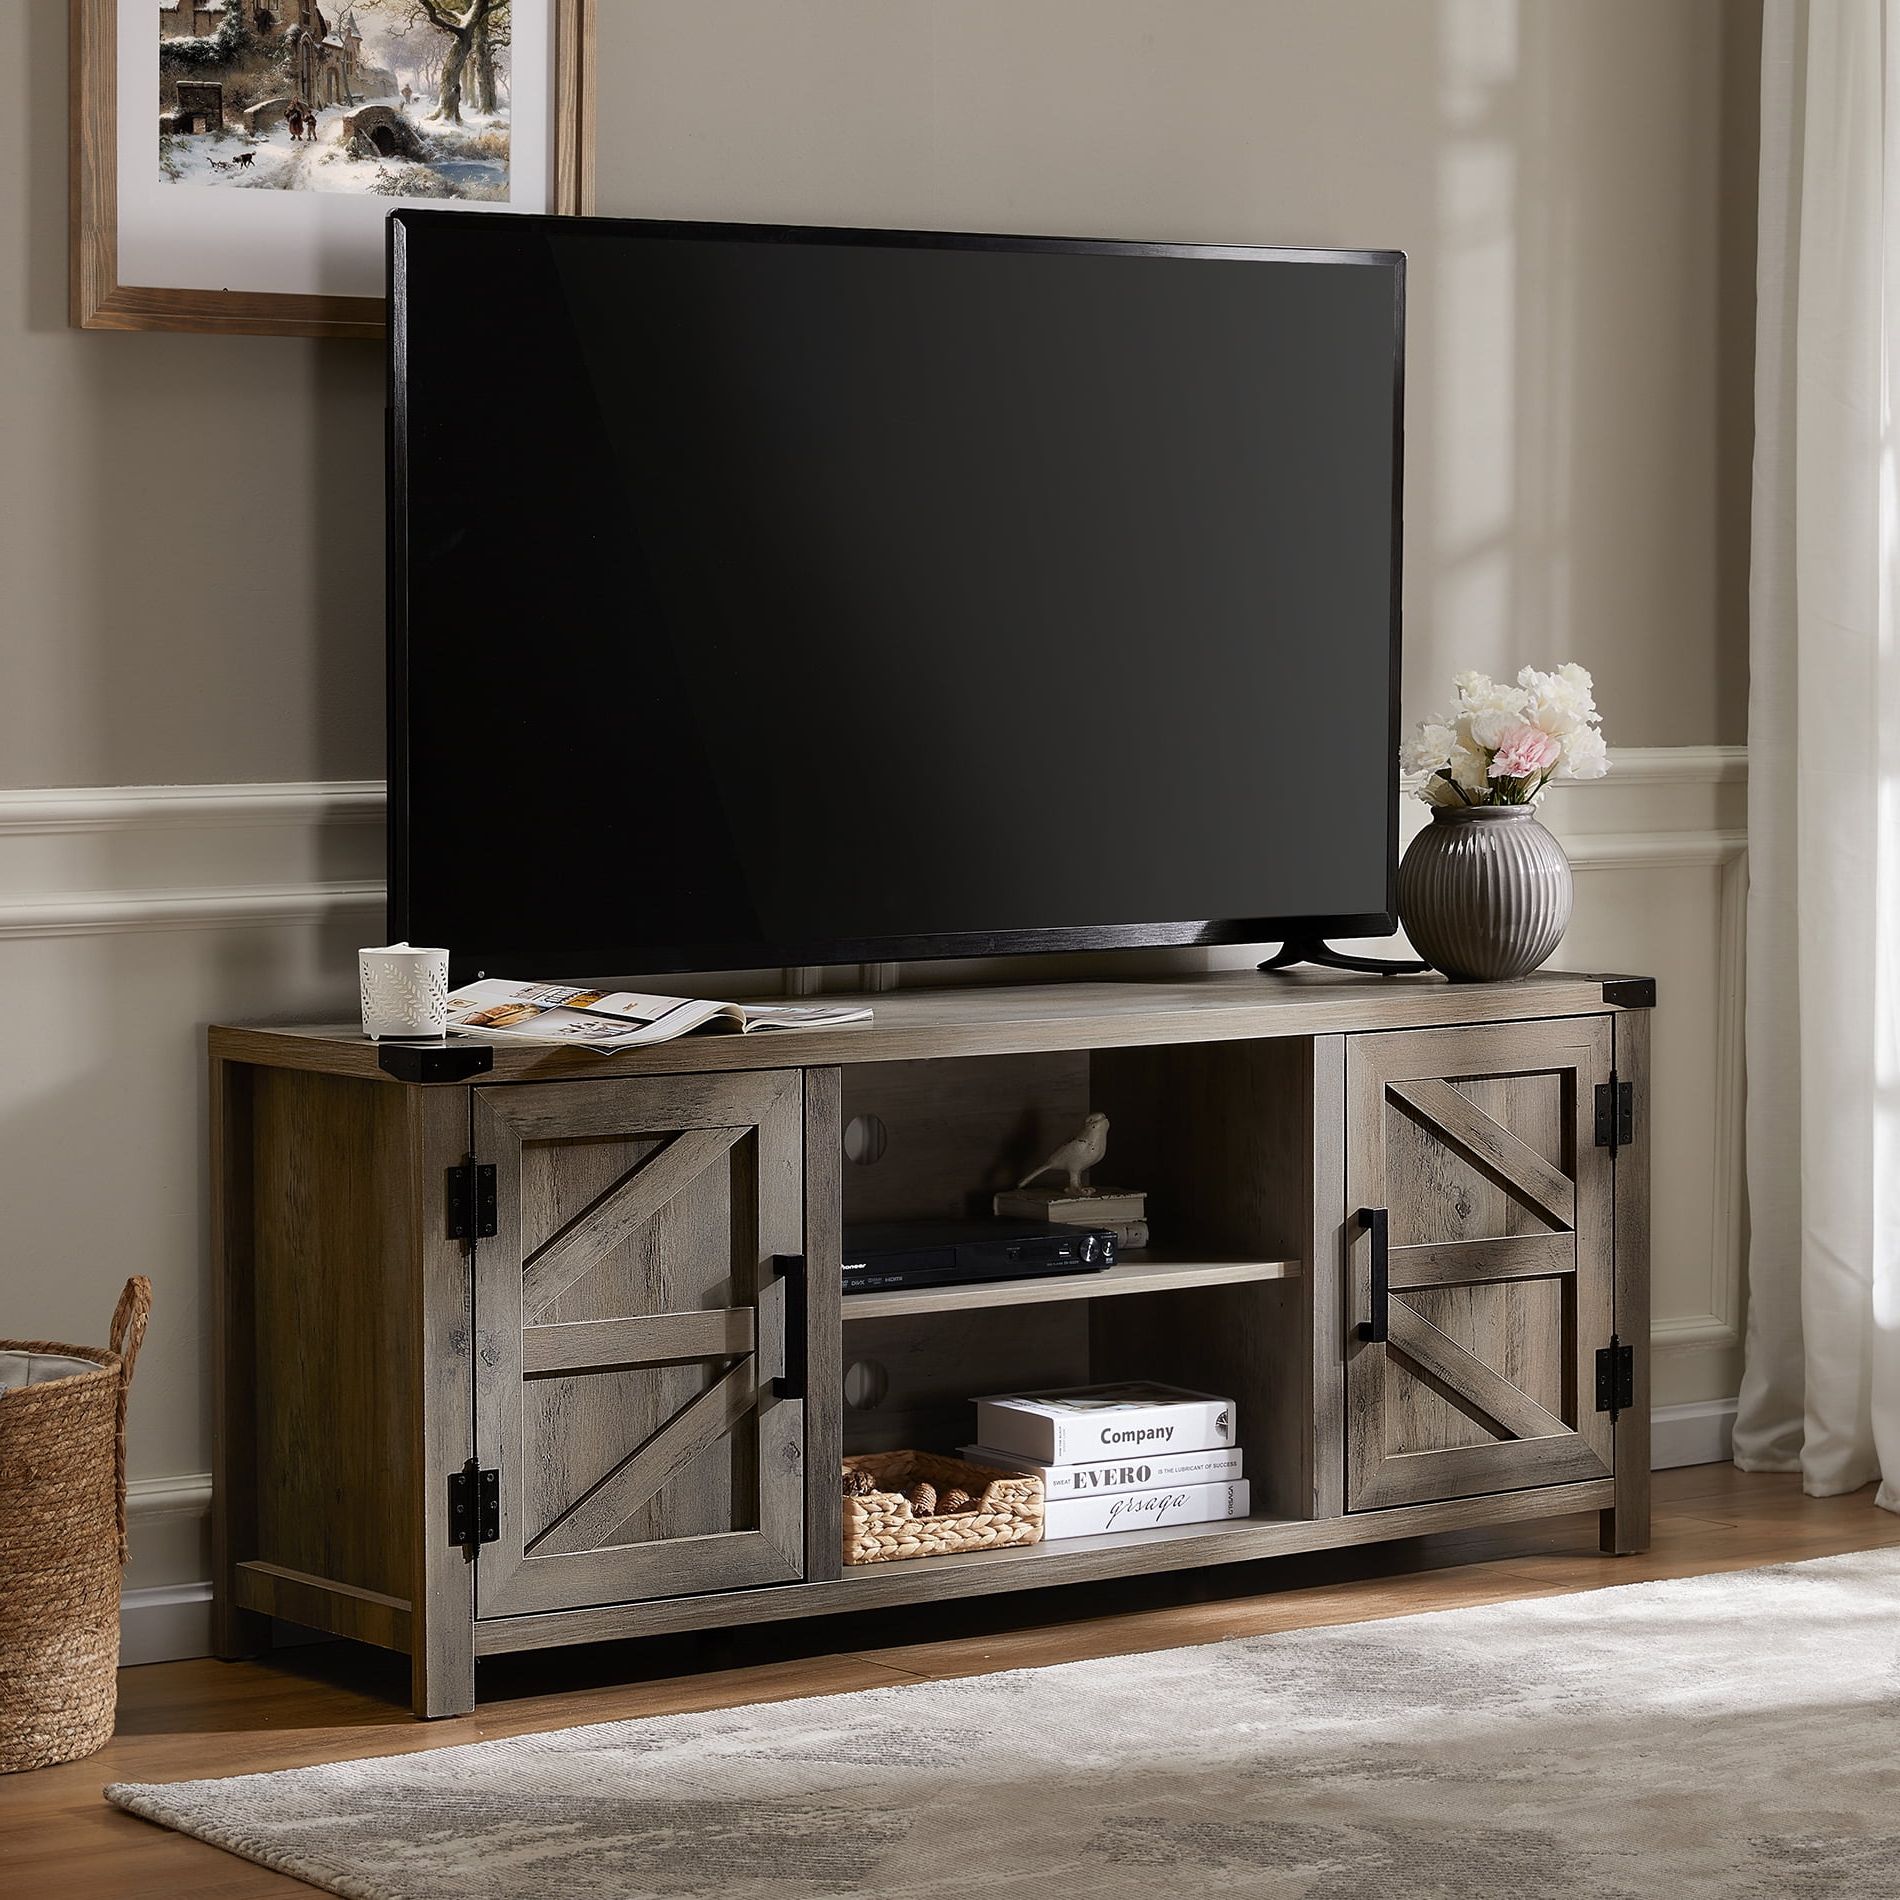 Favorite Buy Fitueyes Farmhouse Barn Door Wood Tv Stands For 70 Flat Screen Pertaining To Farmhouse Tv Stands For 70 Inch Tv (Photo 2 of 15)